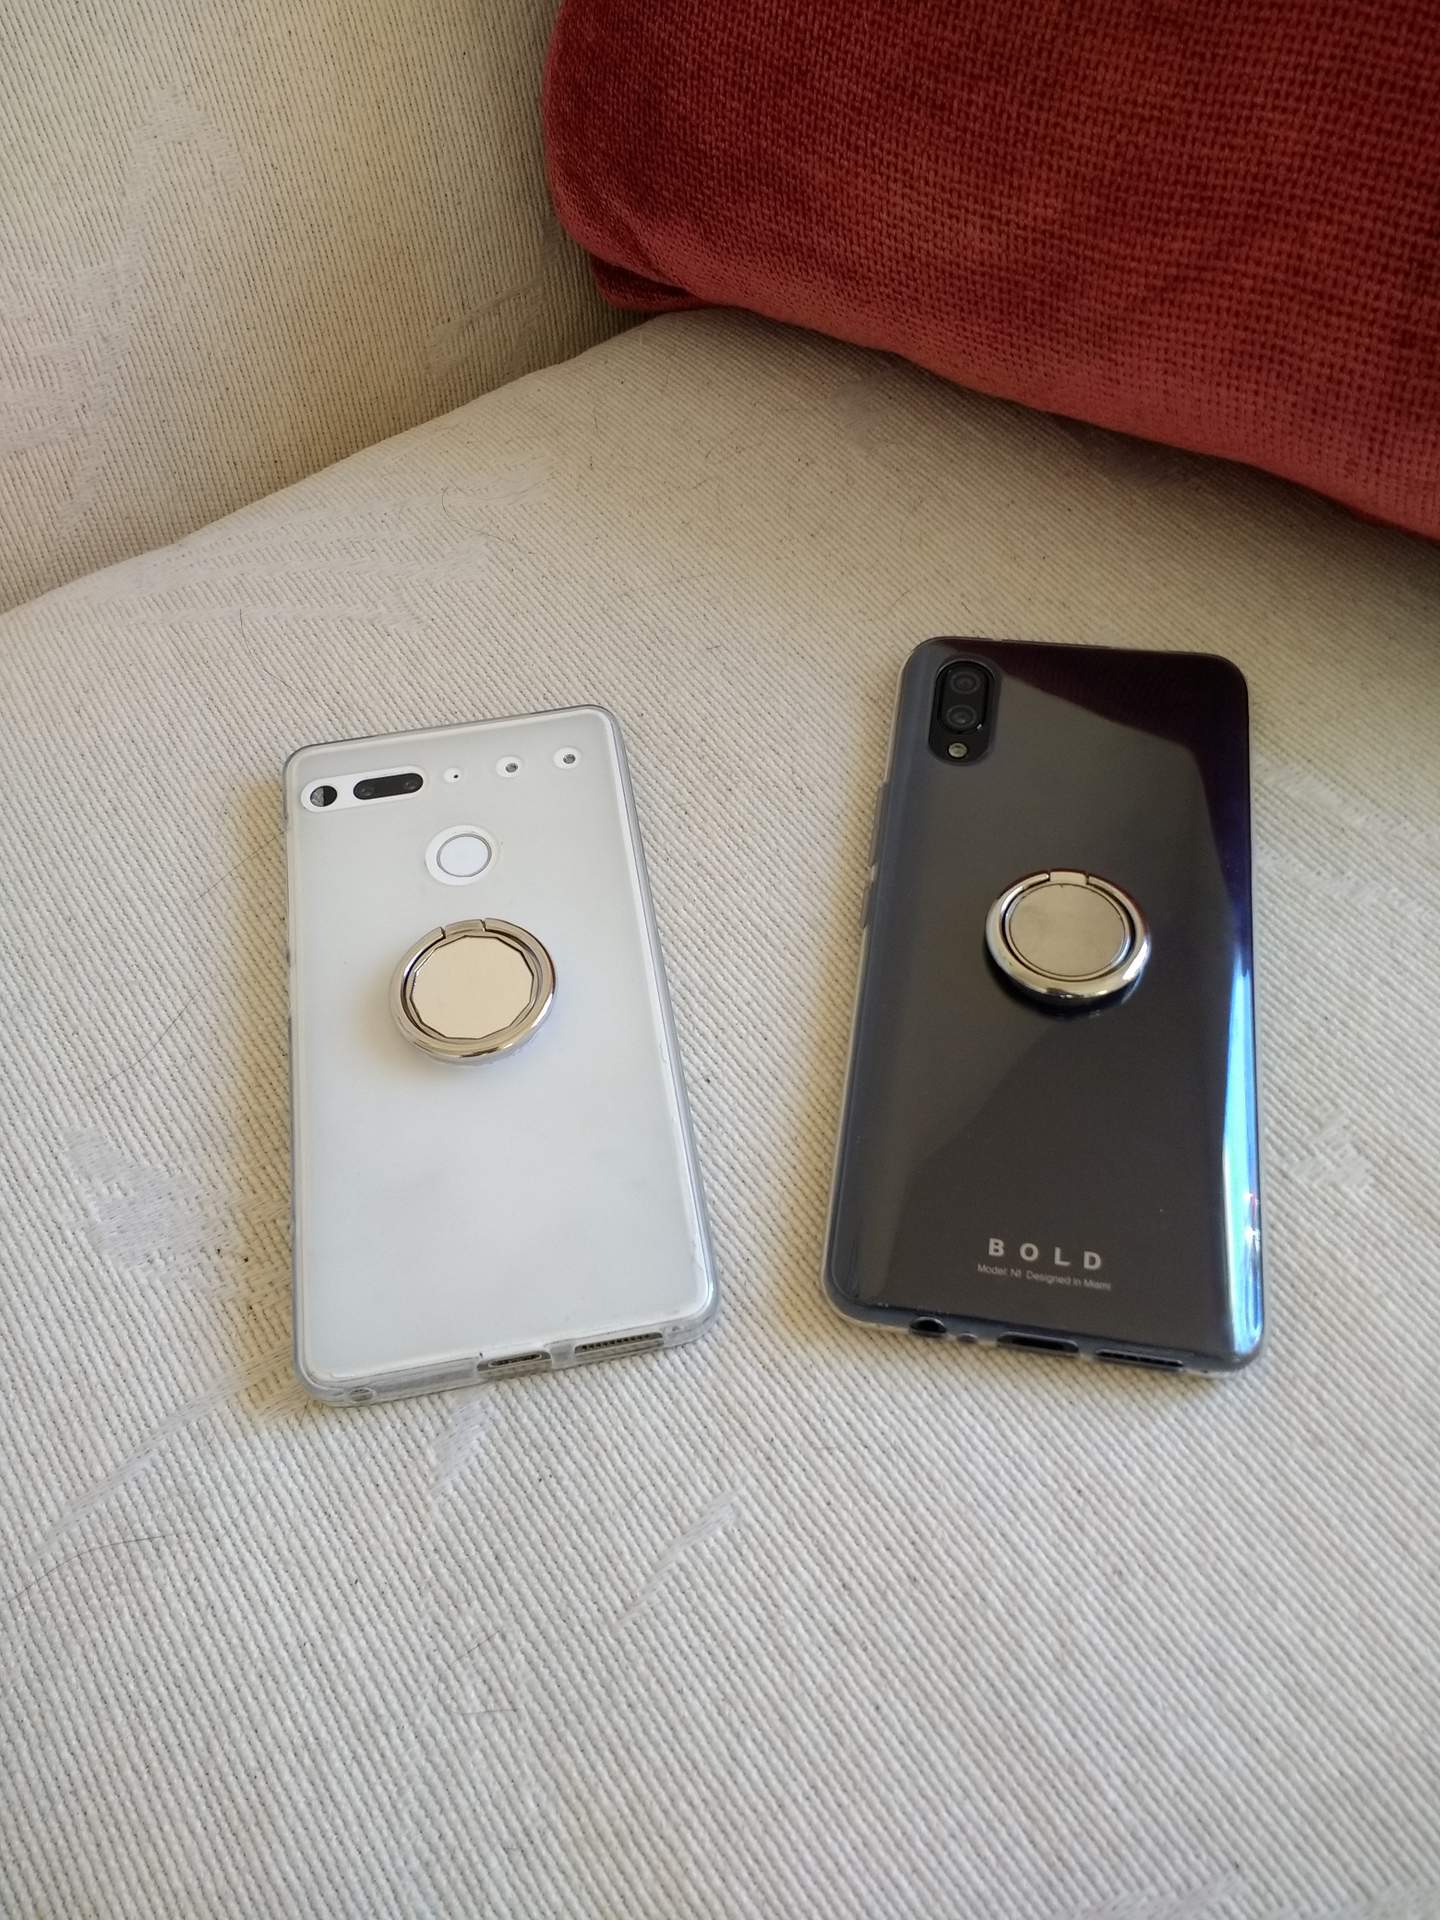 White Essential PH-1 (2017), black Bold N1 (2019) phones with ring stands